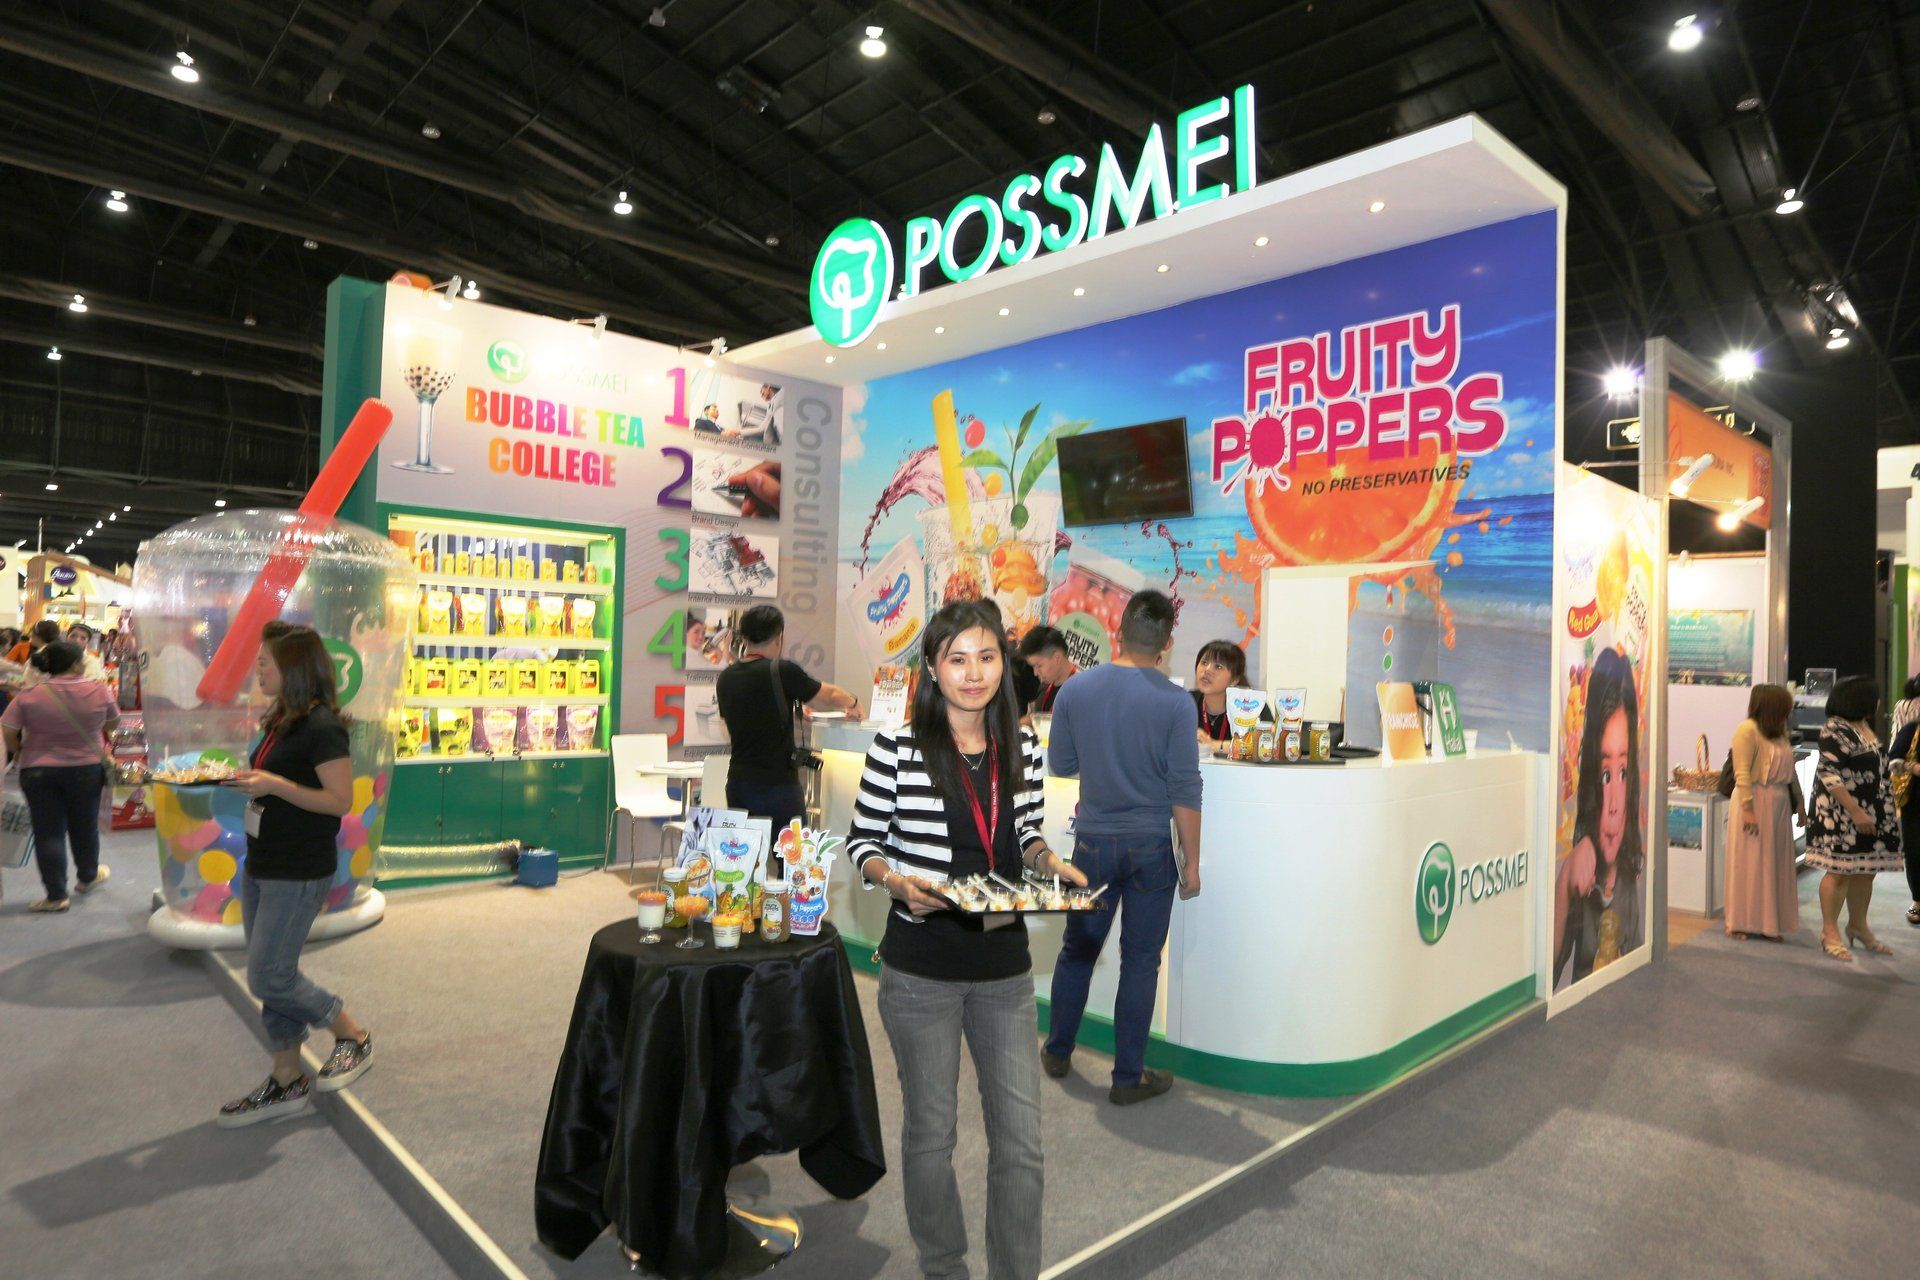 Possmei International @ Thaifex 2015. Booth designed and built by Essential Global Fairs.